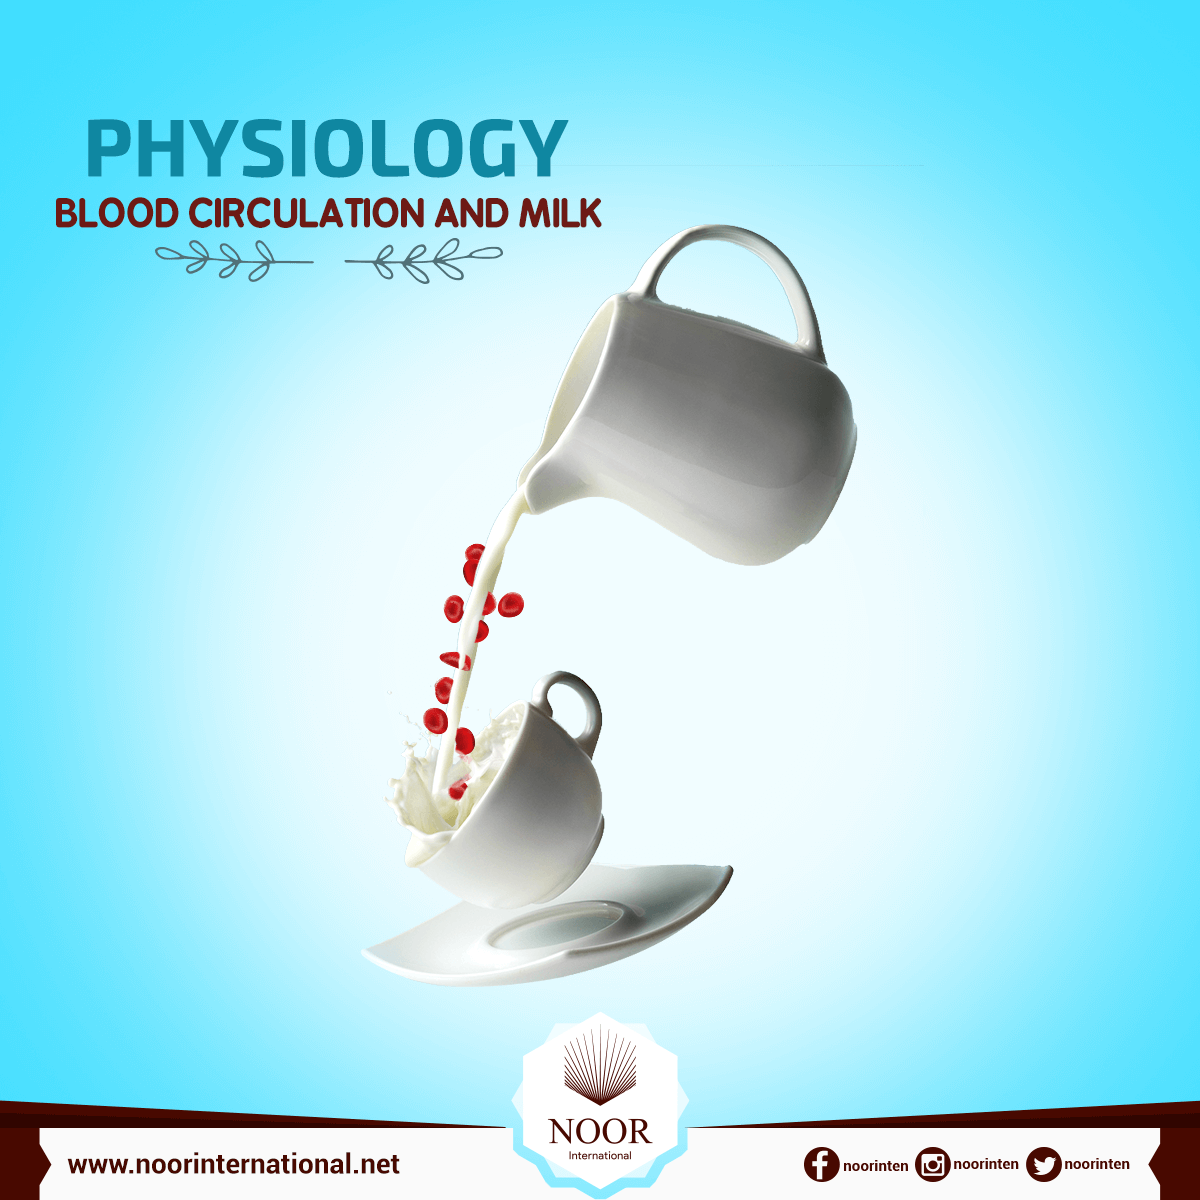 PHYSIOLOGY BLOOD CIRCULATION AND MILK